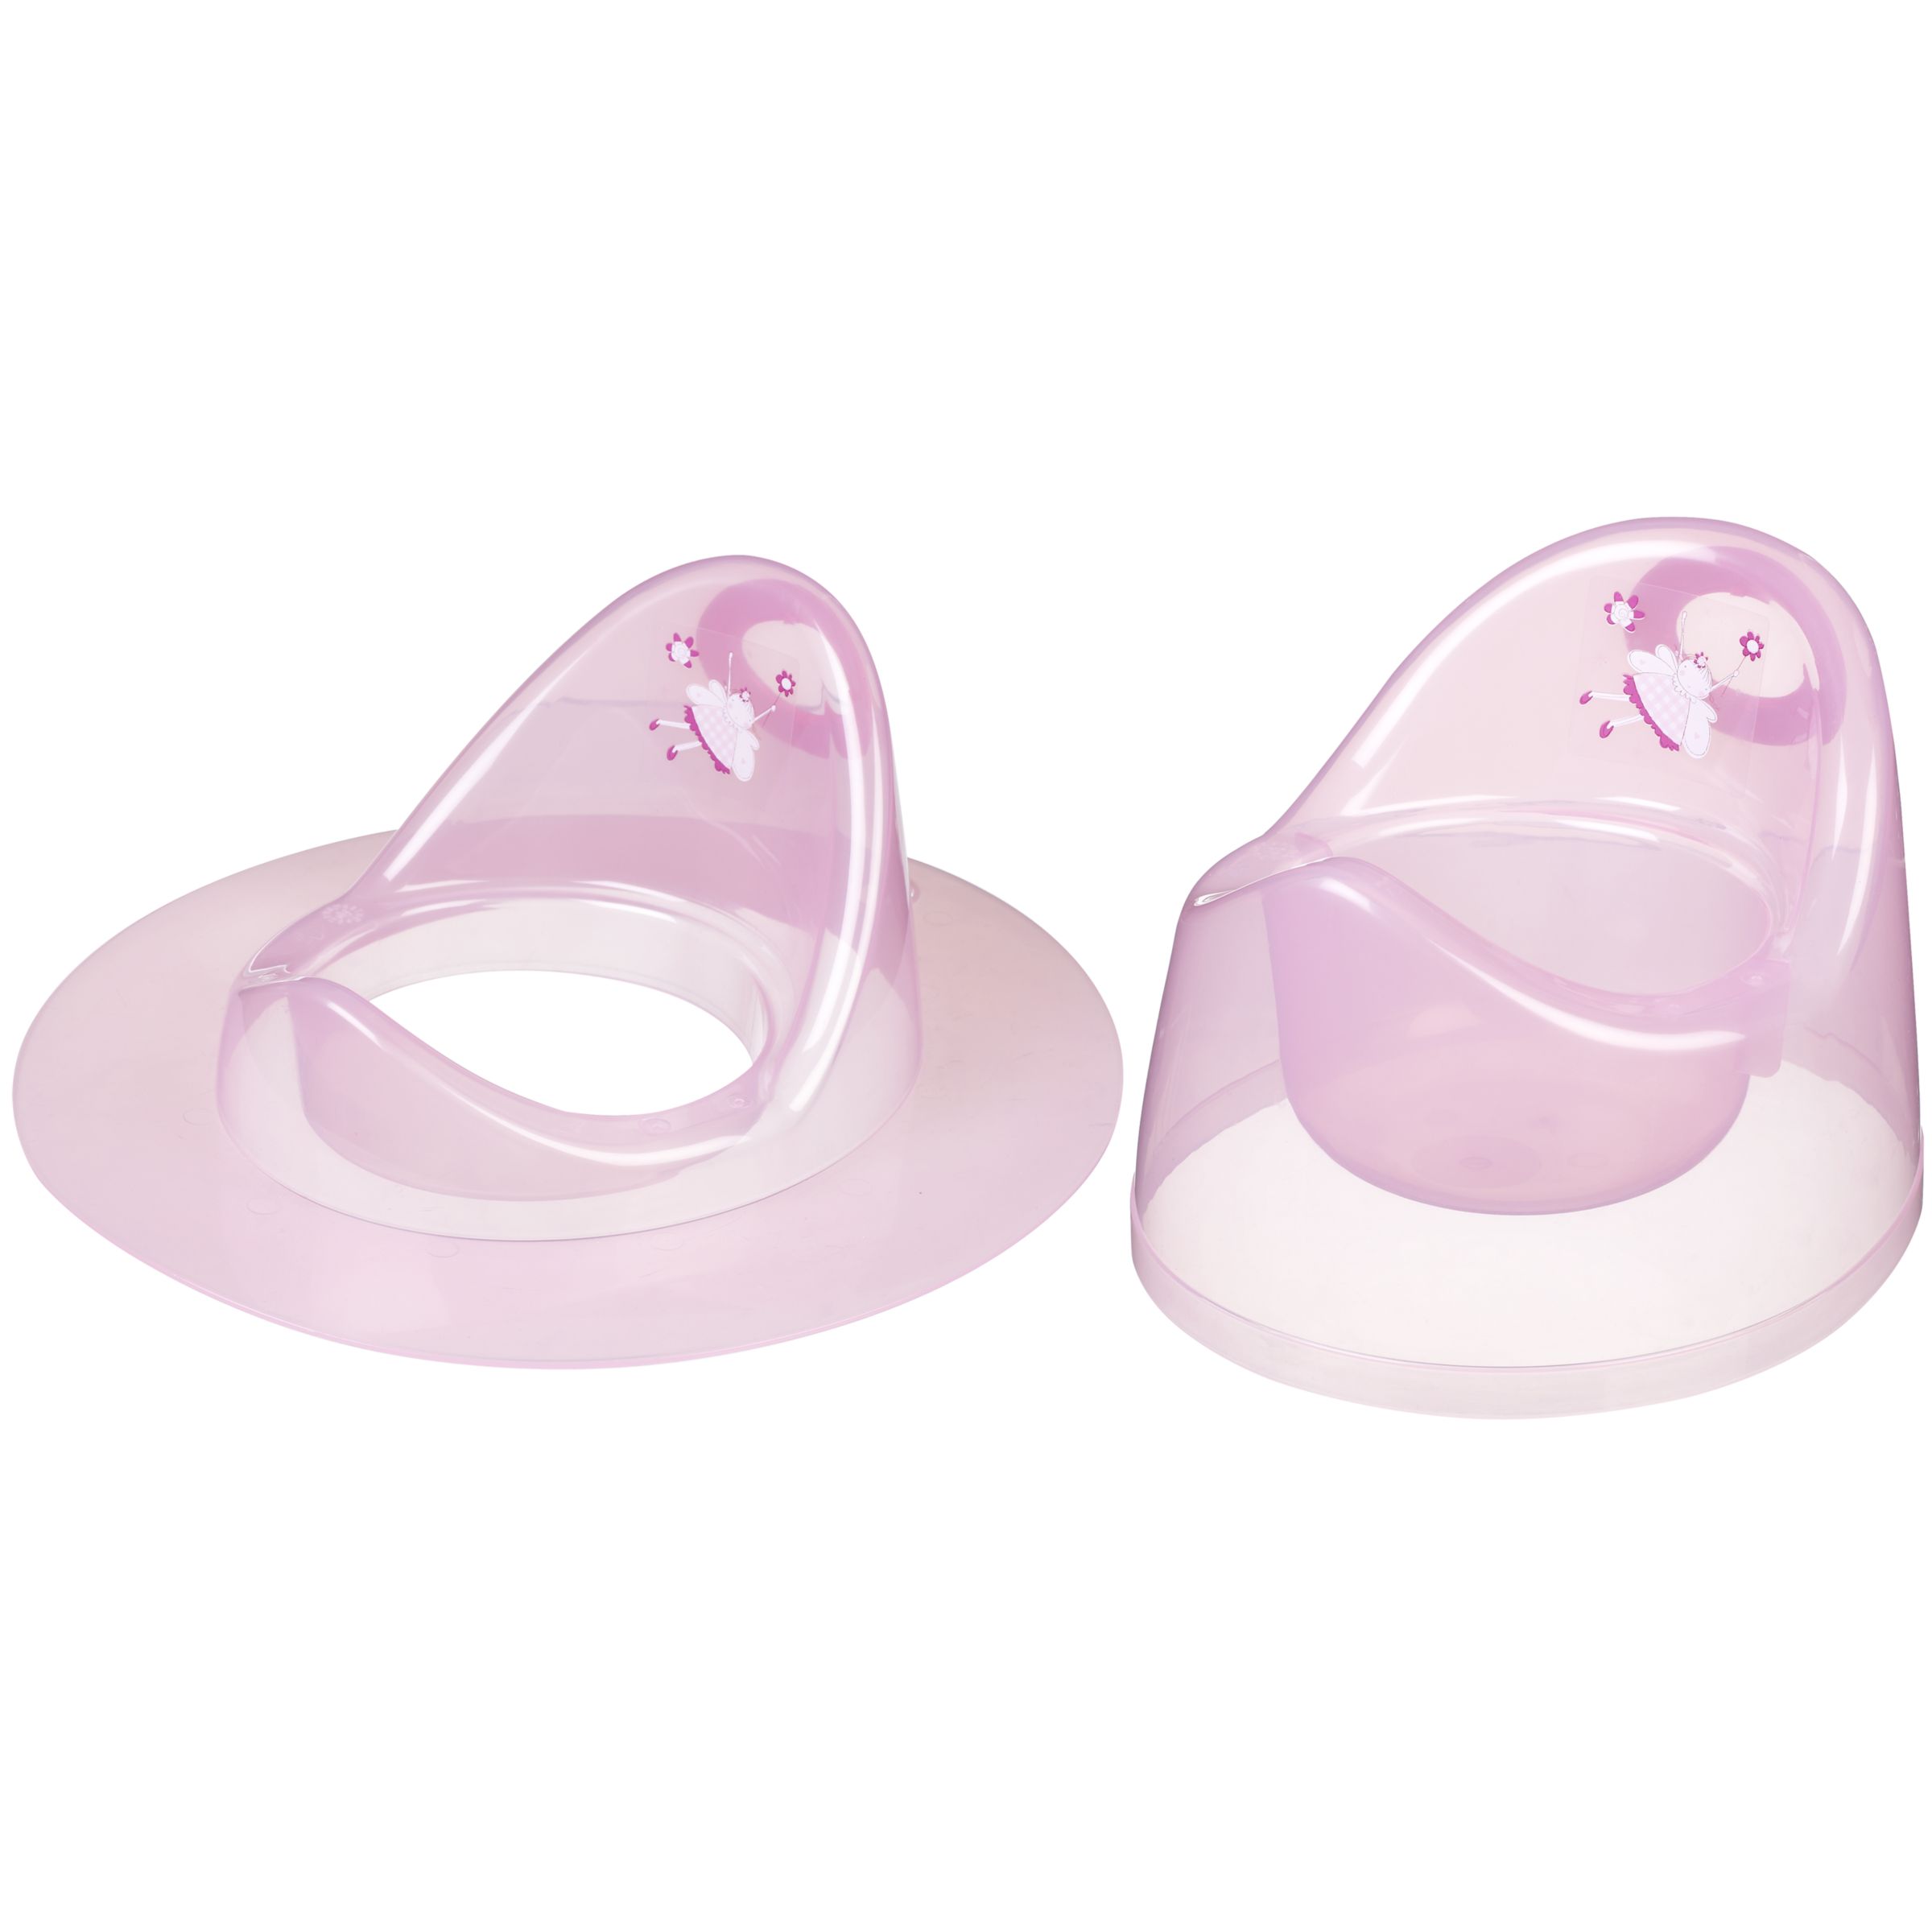 Twinkle Twinkle Potty and Toilet Seat